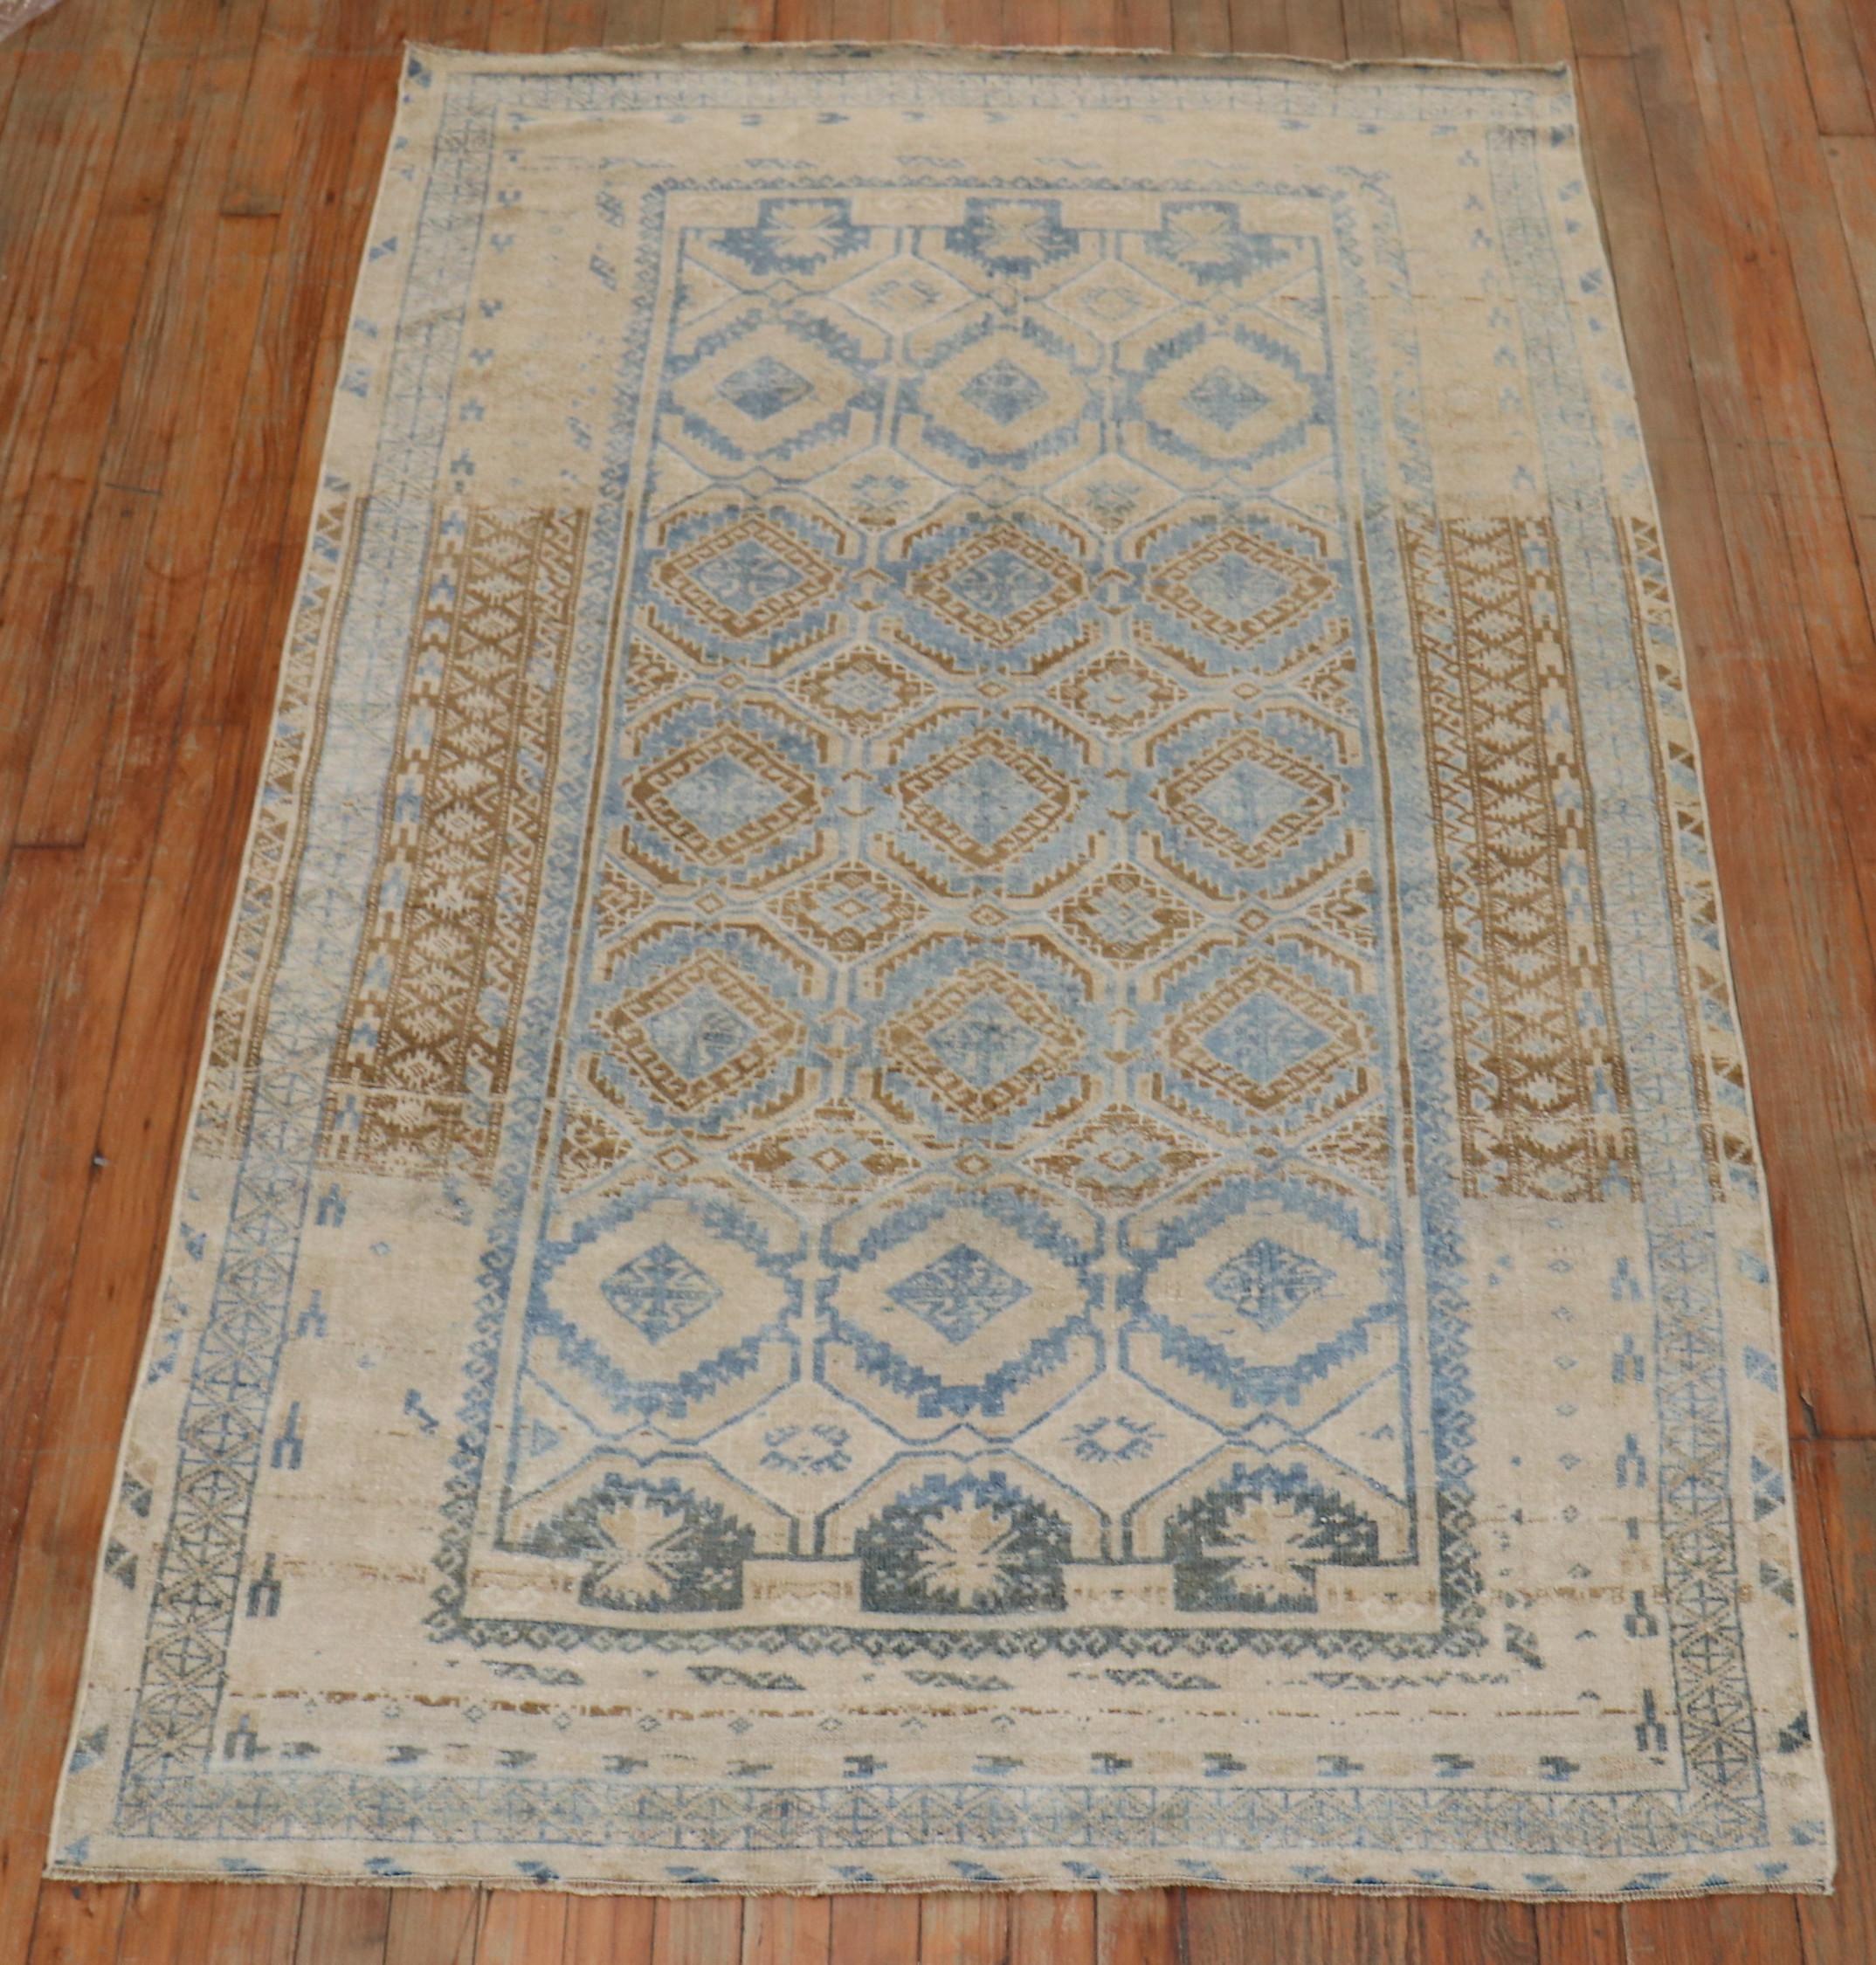 Persian Balouch Accent Size rug from the 2nd quarter of the 20th century in blue, brown and sand tones

Measures: 3'11'' x 6'9''.